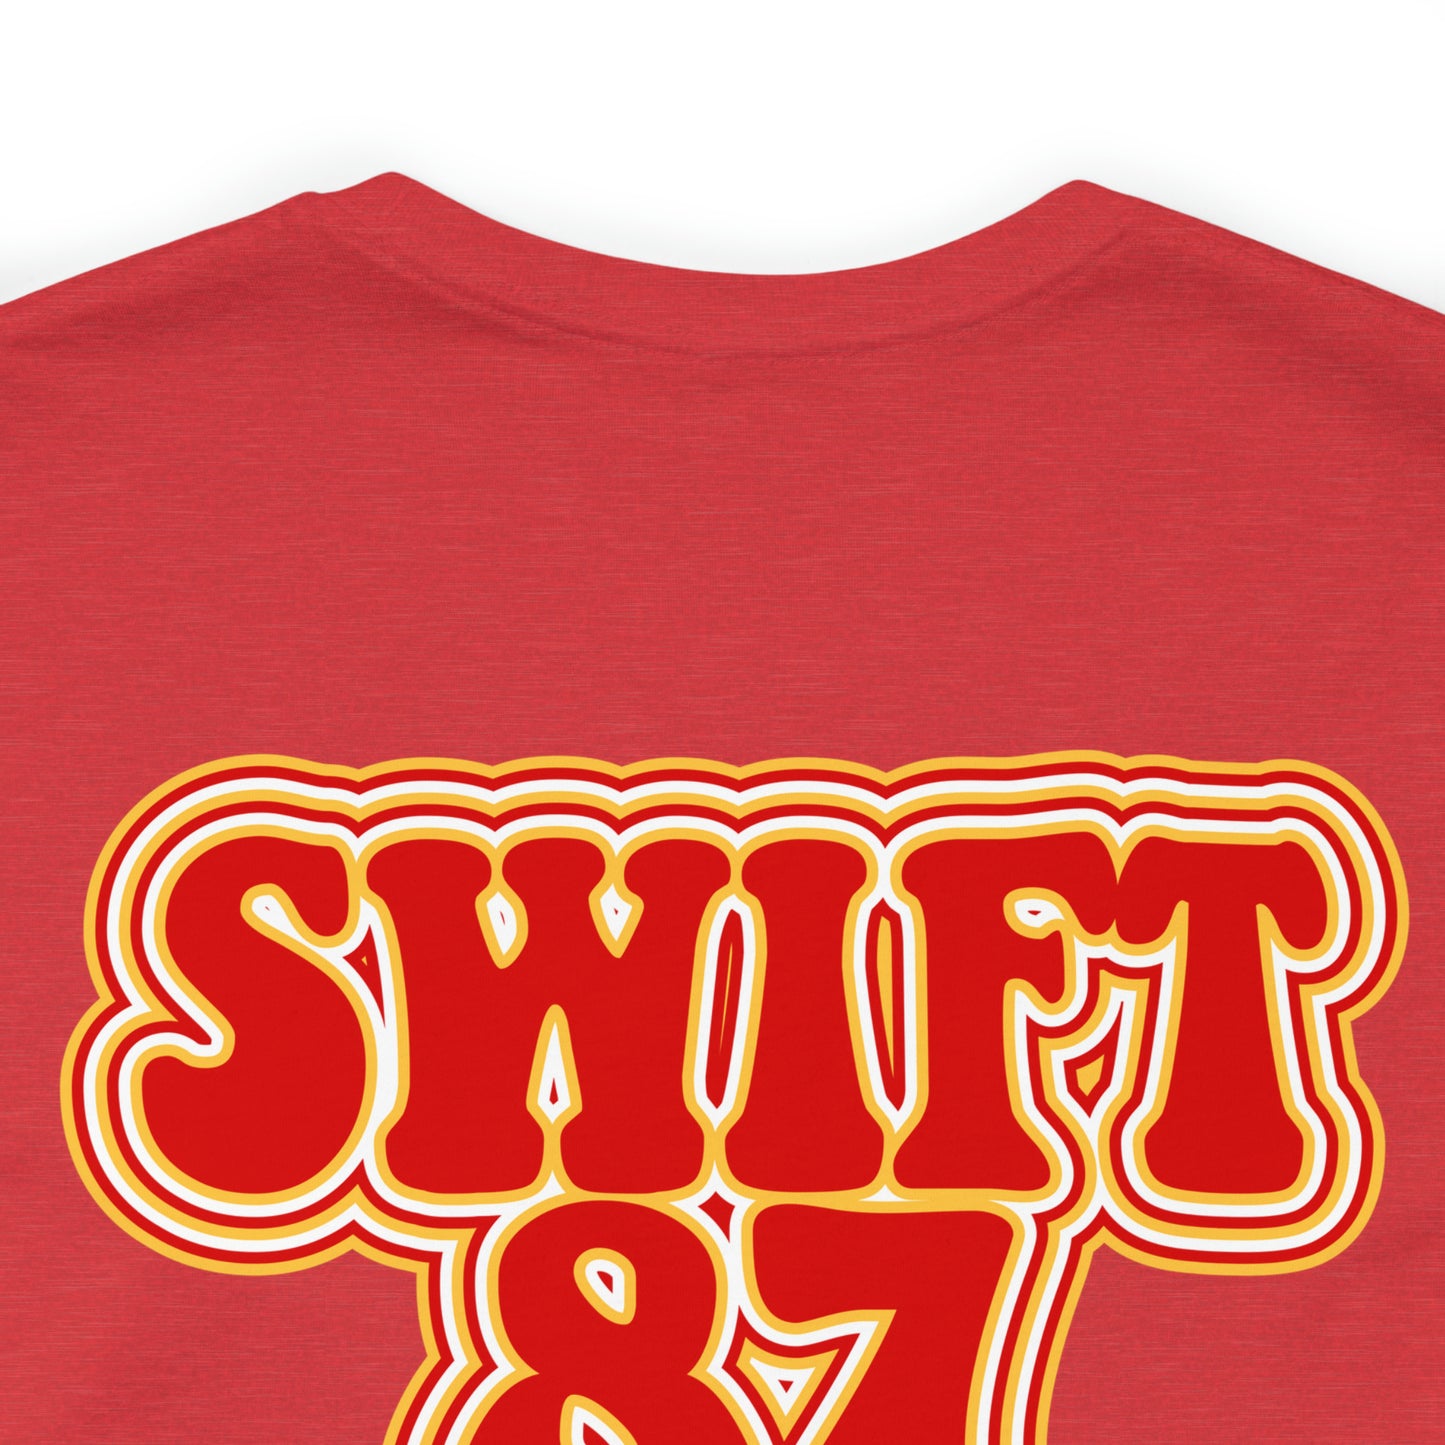 Swift Kelce Football Bubble Font Bella Jersey Short Sleeve Tee (Unisex) - Front and Back Design